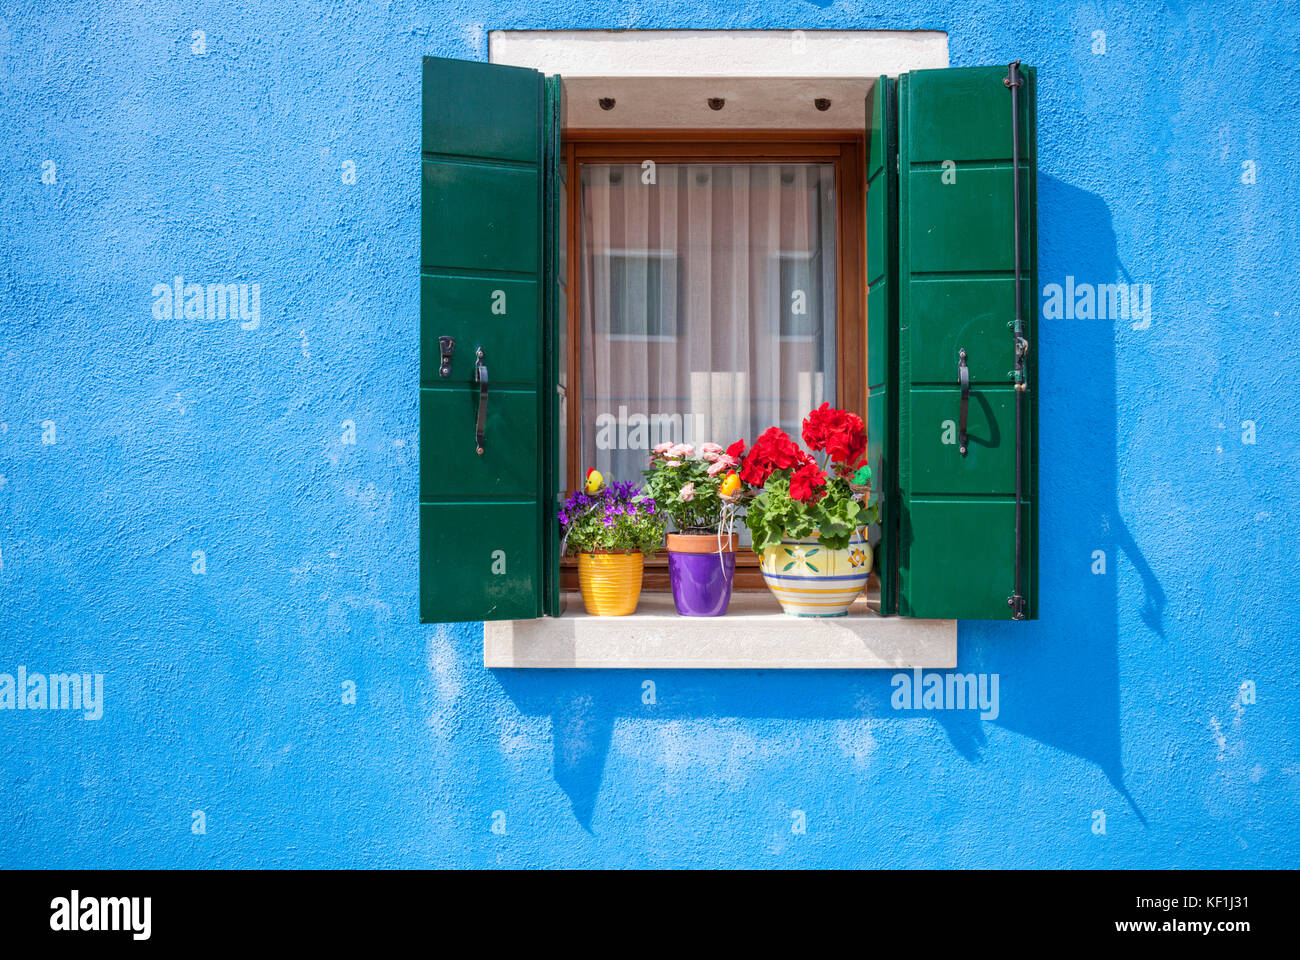 VENICE ITALY VENICE blue walls window with green shutters and pots of flowers Burano Italy eu europe Stock Photo